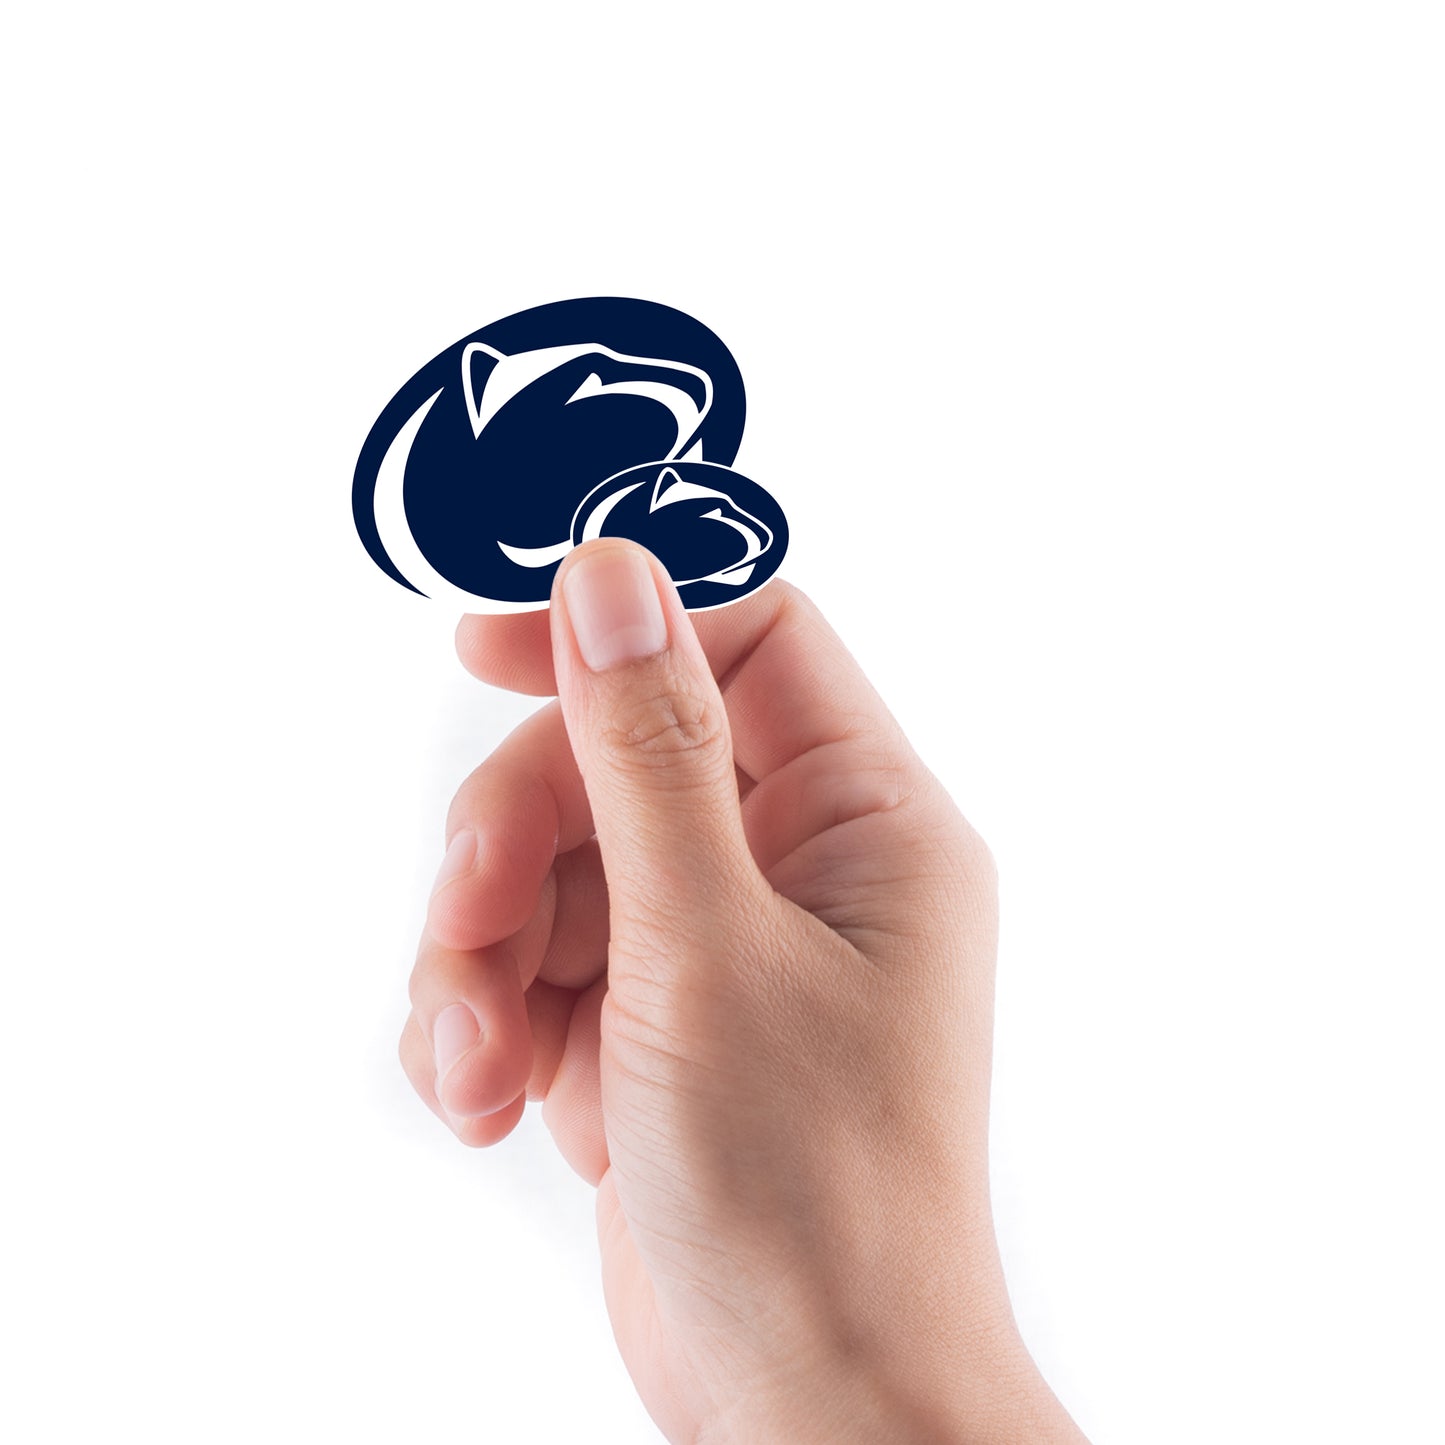 Sheet of 5 -Penn State U: Penn State Nittany Lions 2021 Logo Minis        - Officially Licensed NCAA Removable    Adhesive Decal